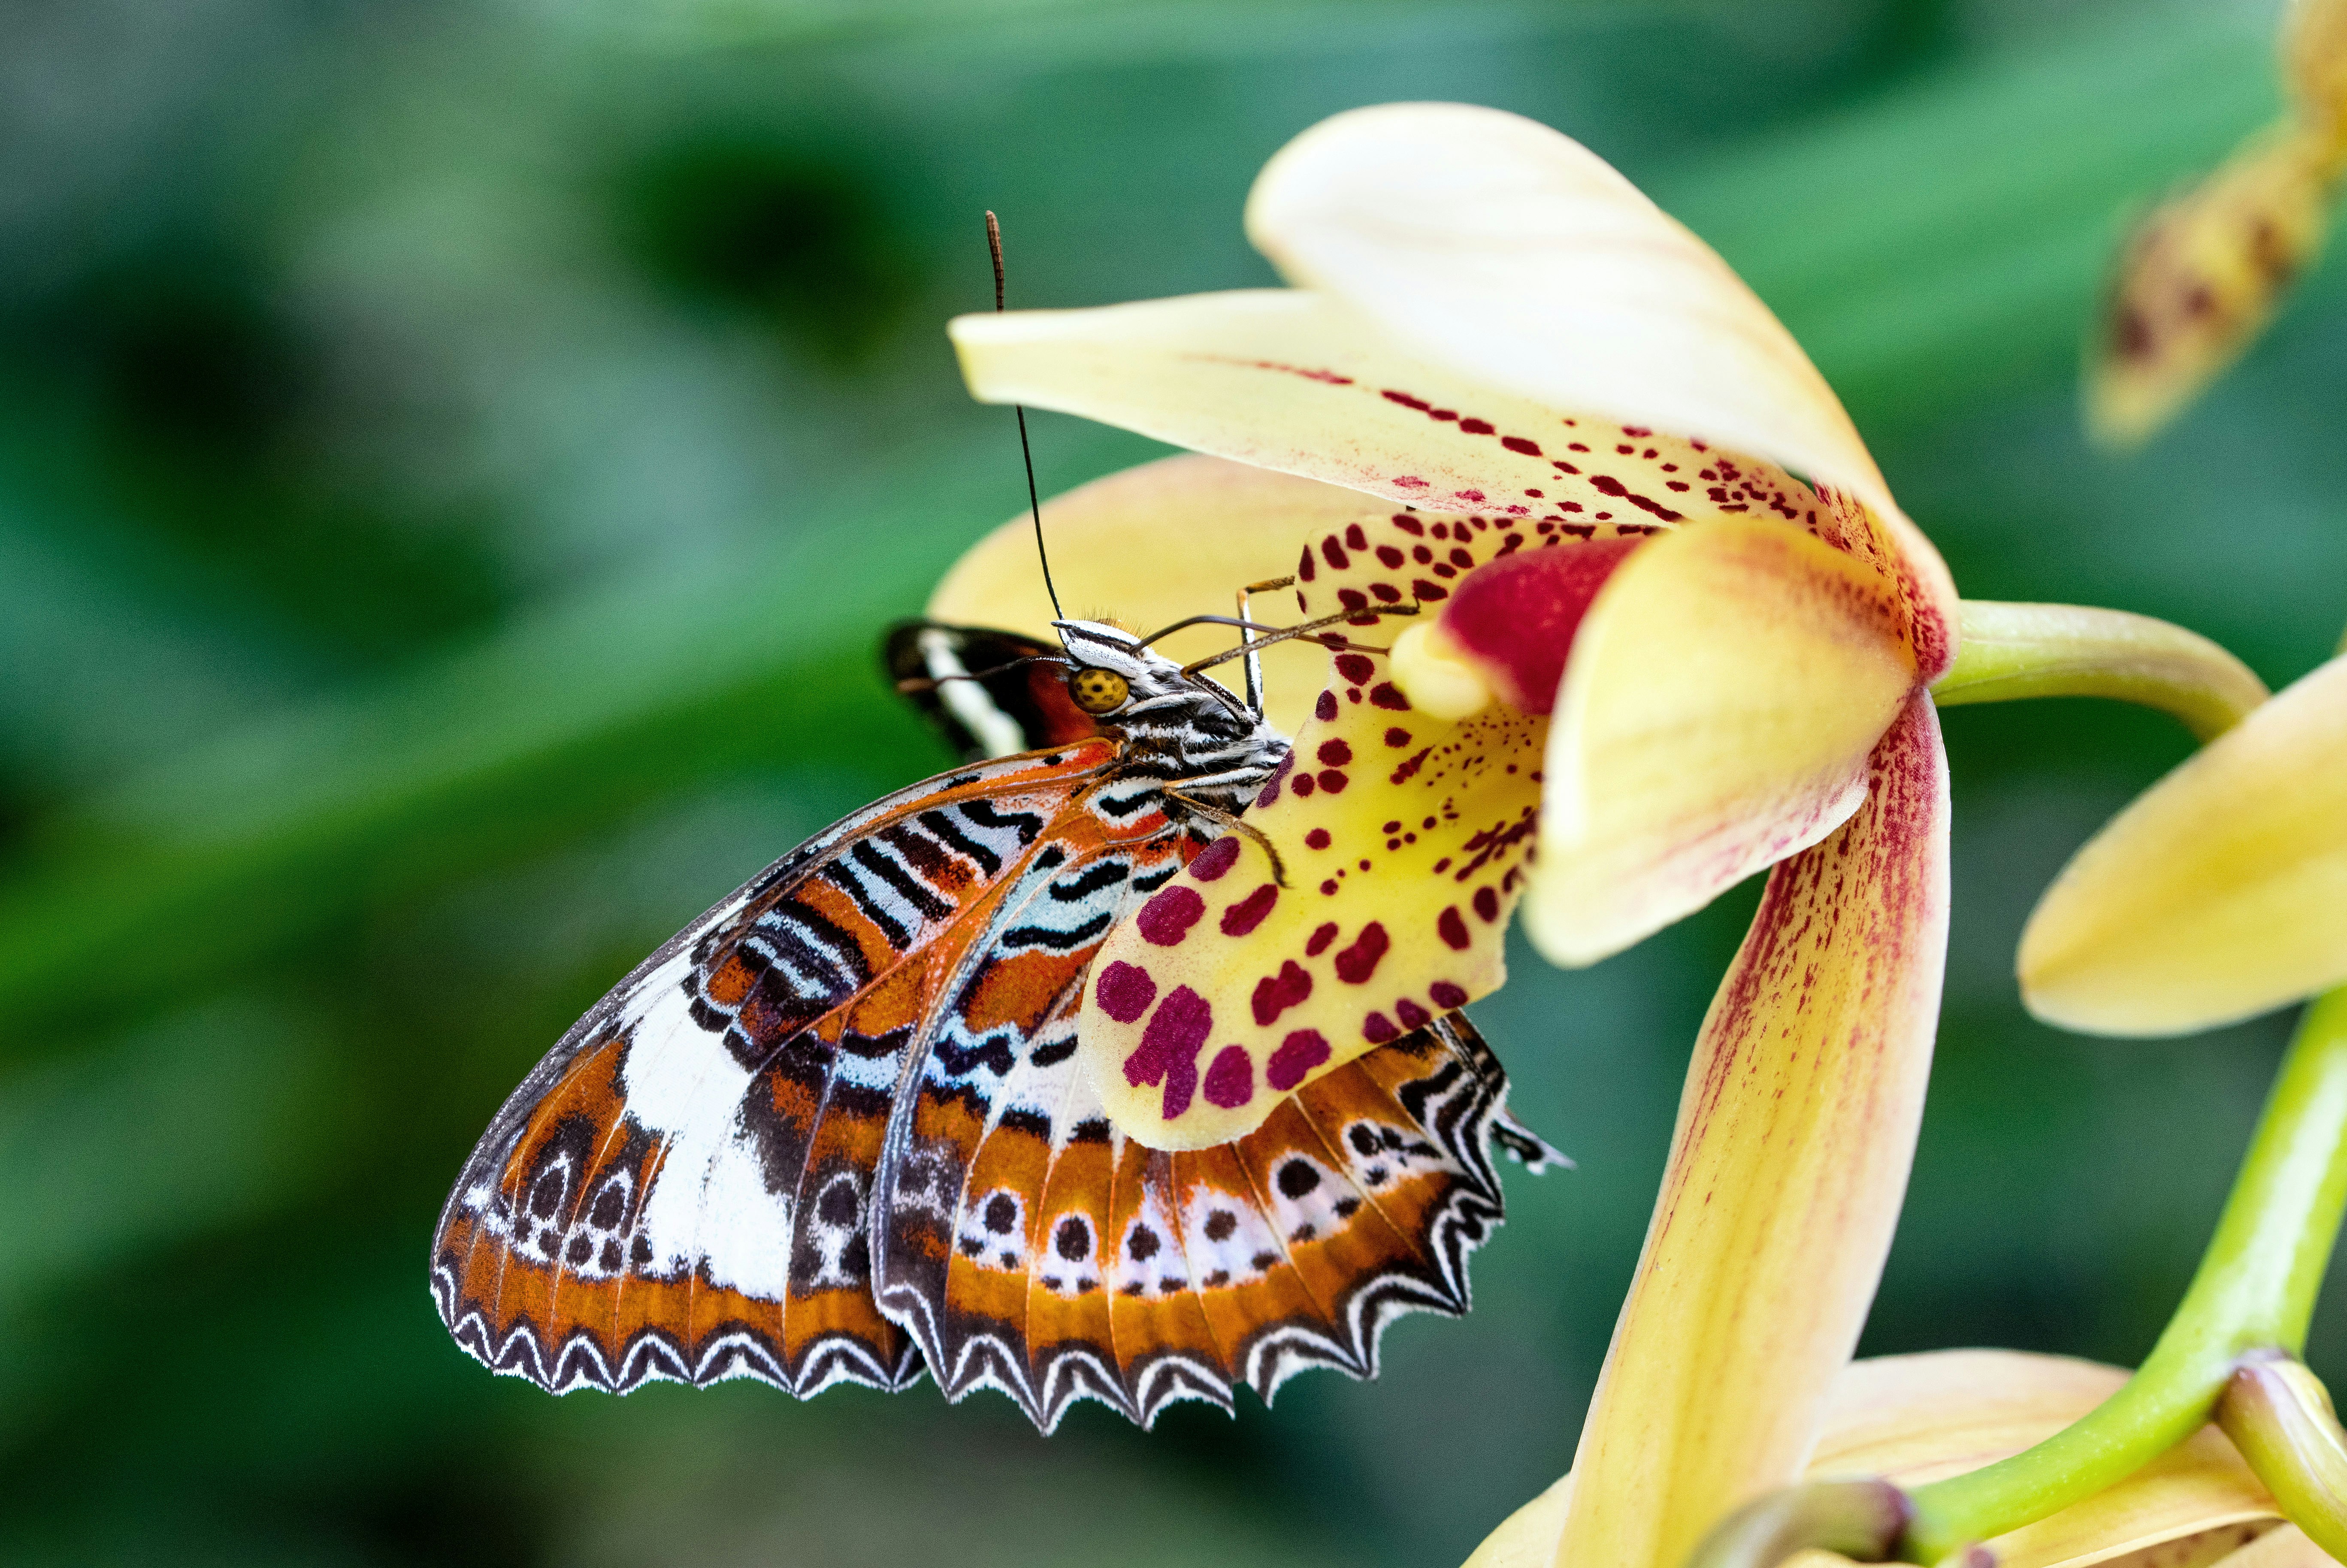 In this photo i like the way the delicate patterns of both the orchid and the butterfly blend into each other. Orange Lacewing butterfly and an orchid flower (Cymbidium cultivar?). Conservatory in the Cairns Botanic grdens.